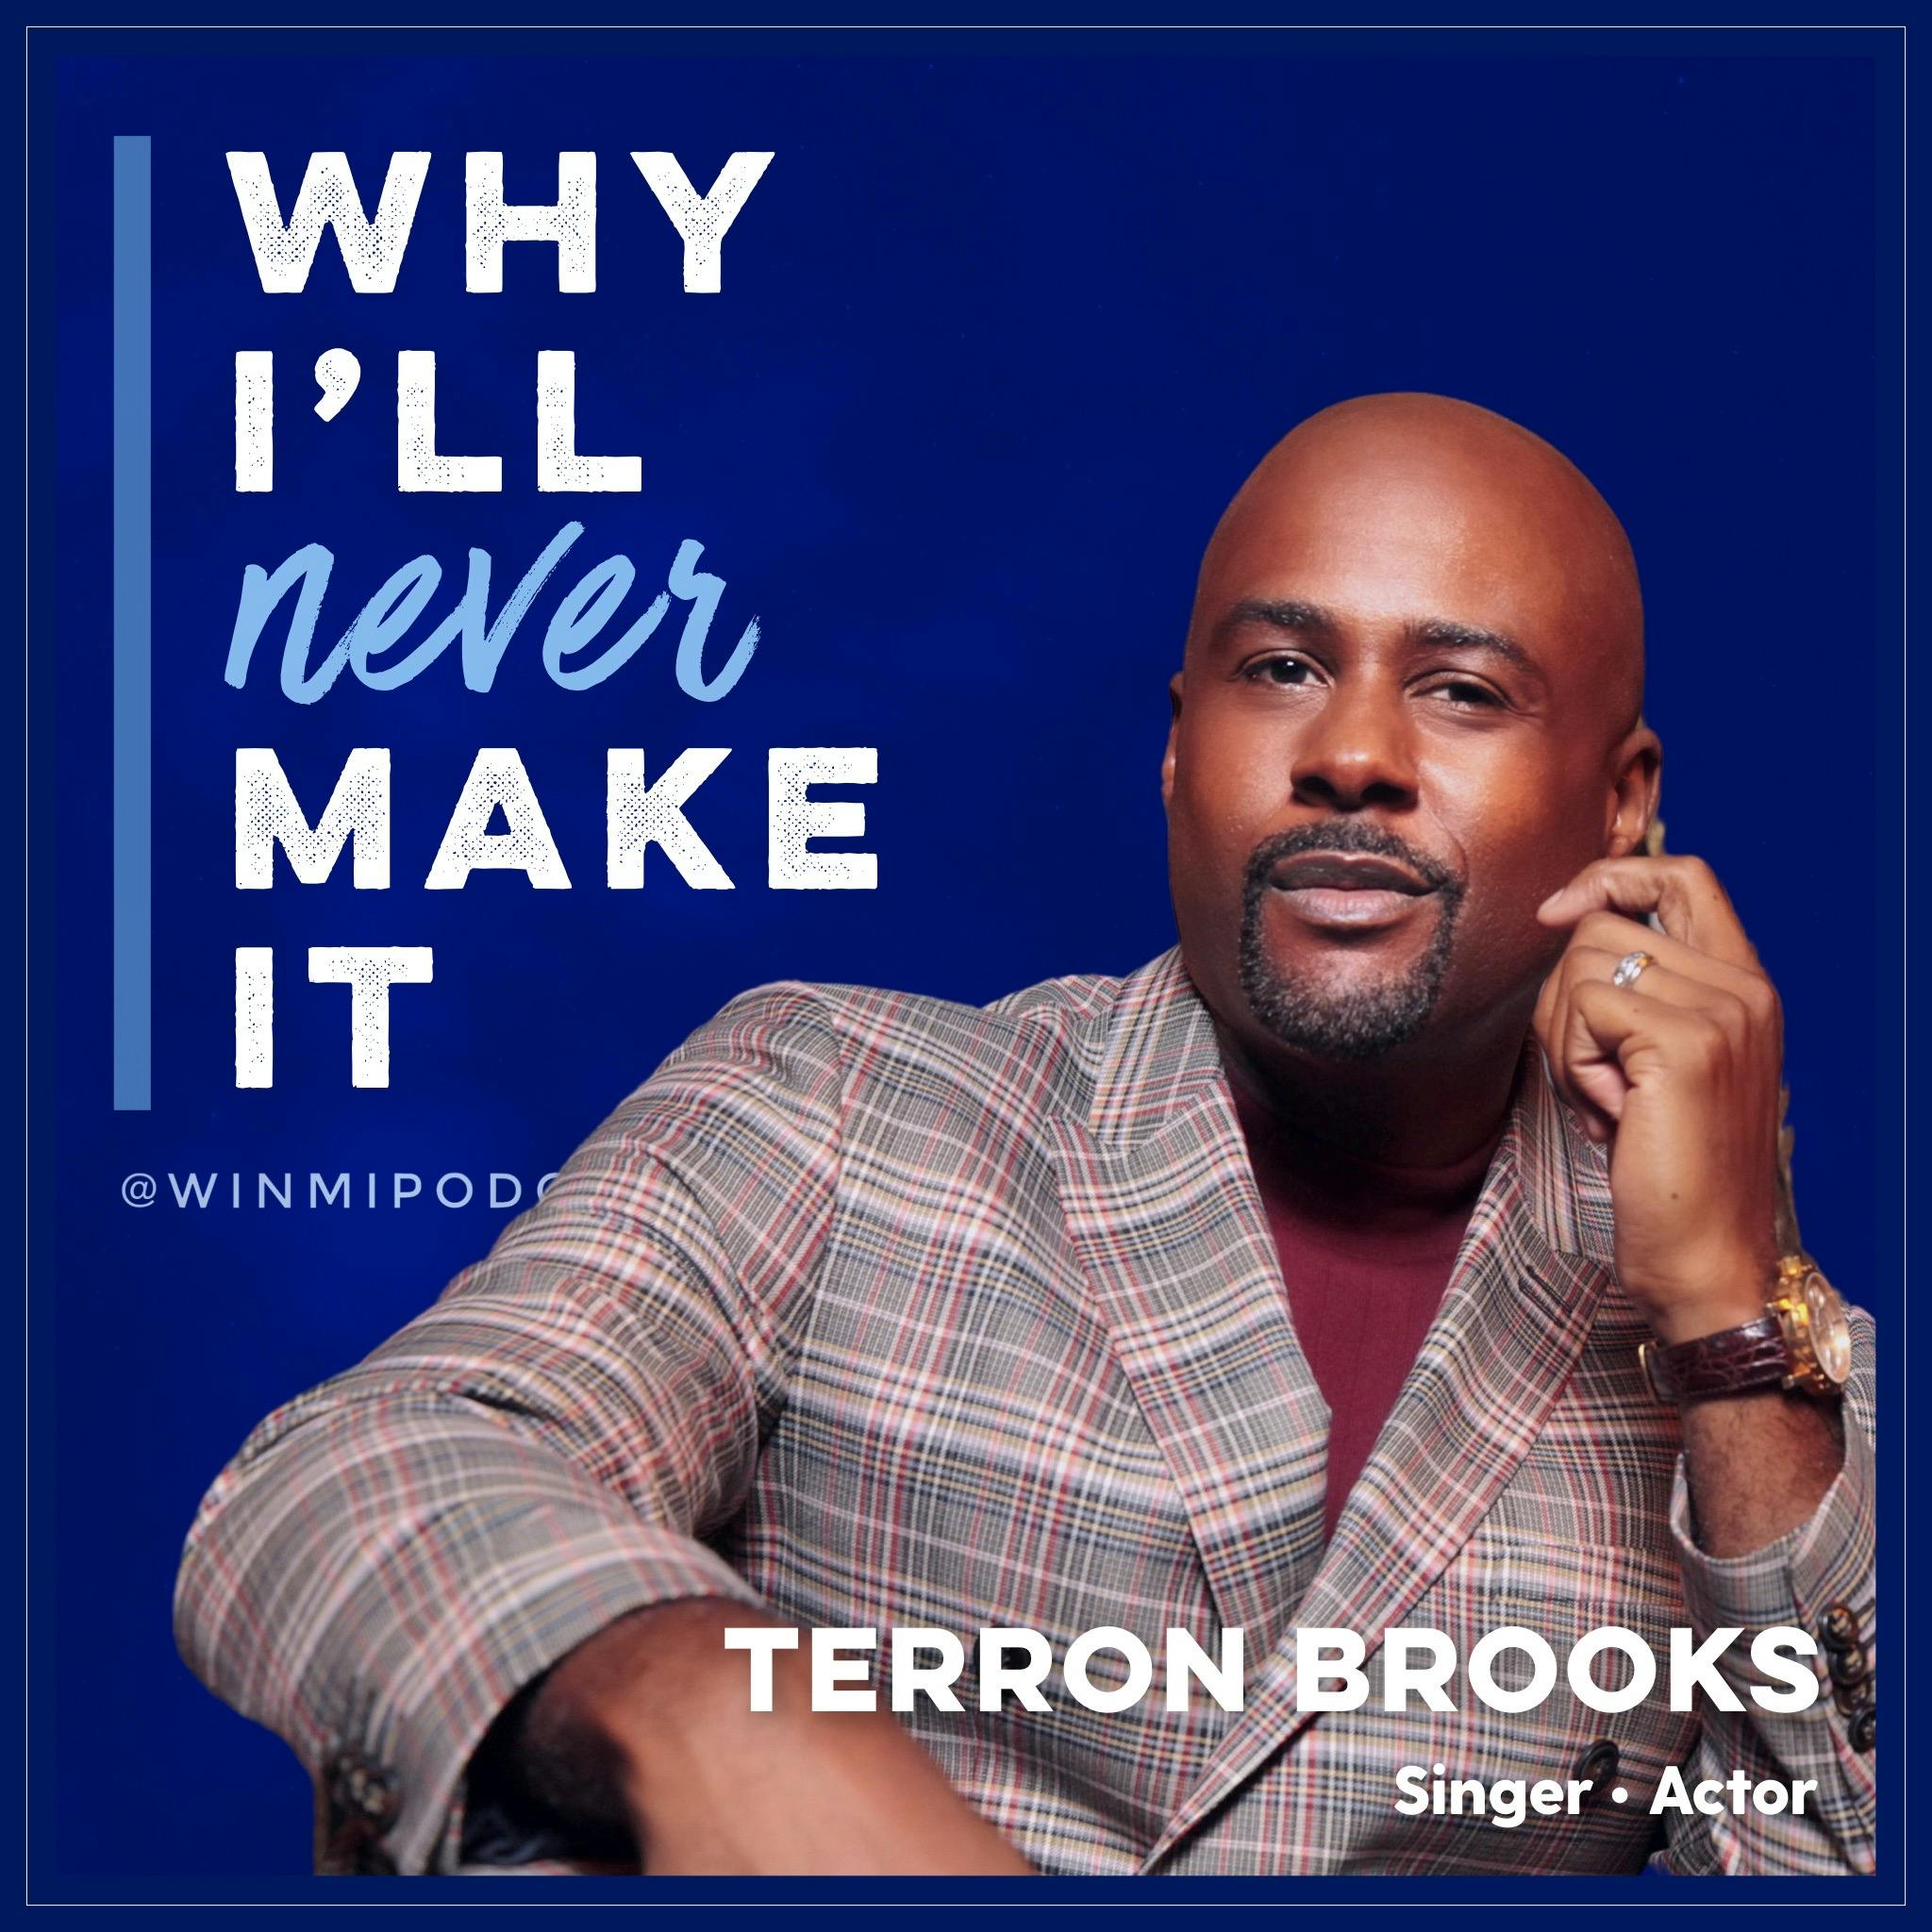 Terron Brooks Discovers There’s More to Success Than Fame